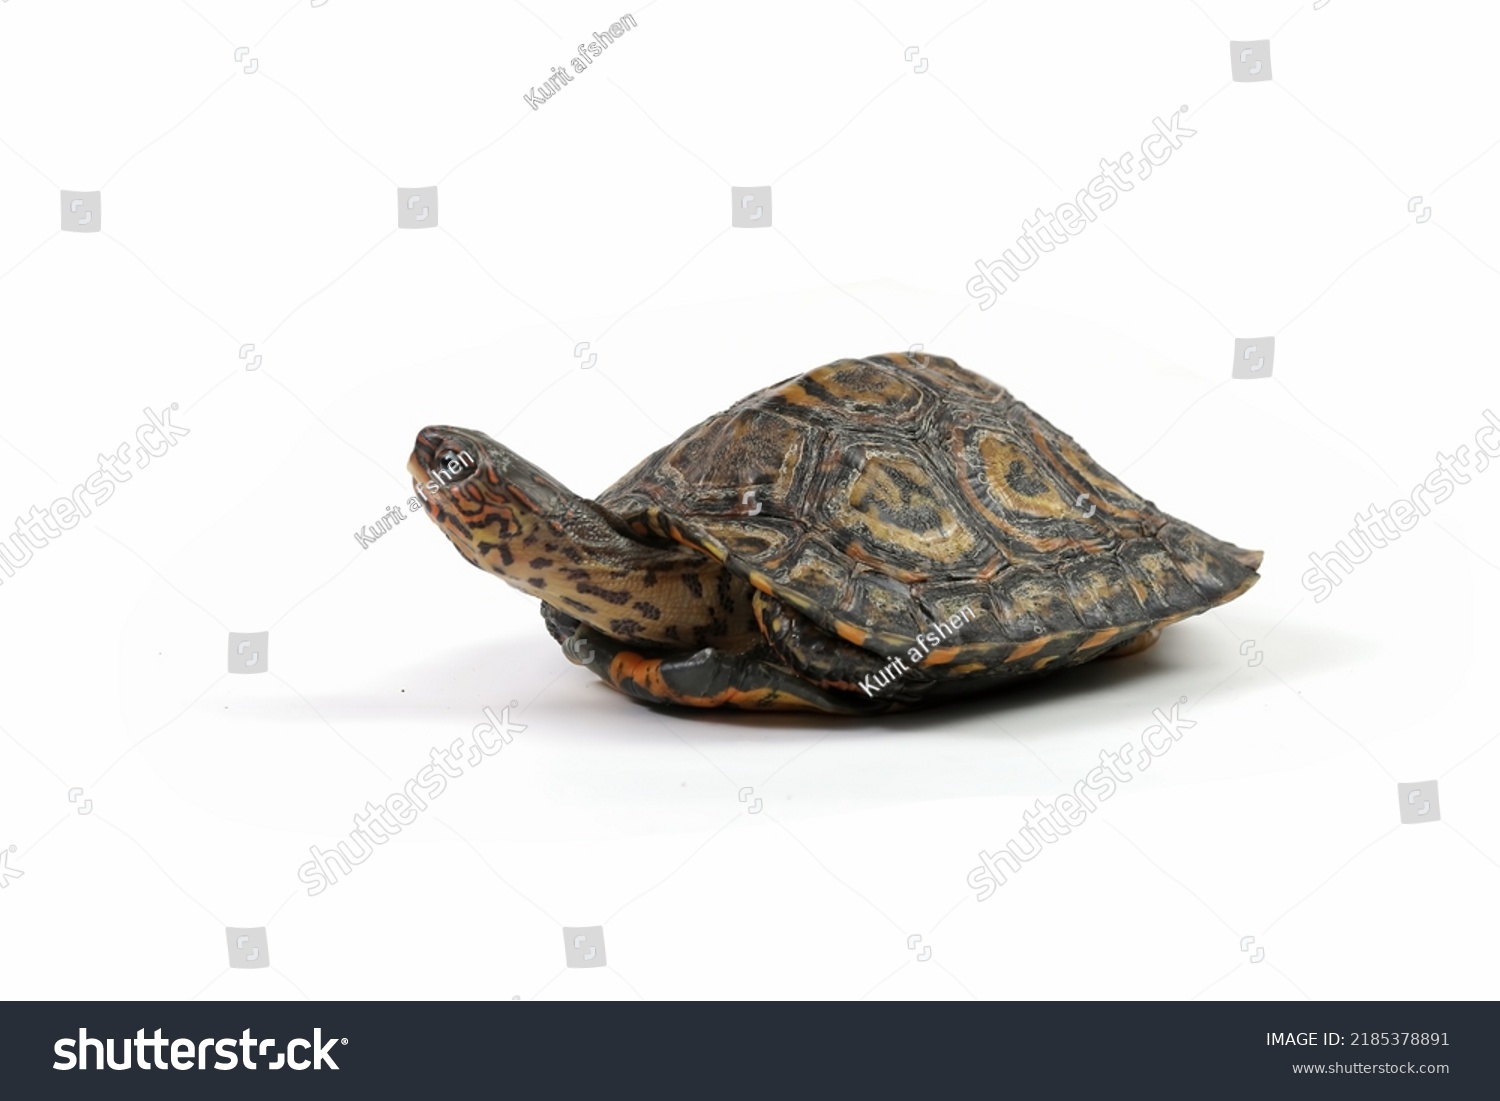 Ornate Wood Turtle closeup from side view, Ornate Wood Turtle "Glyptemys insculpta" closeup on isolated background #2185378891